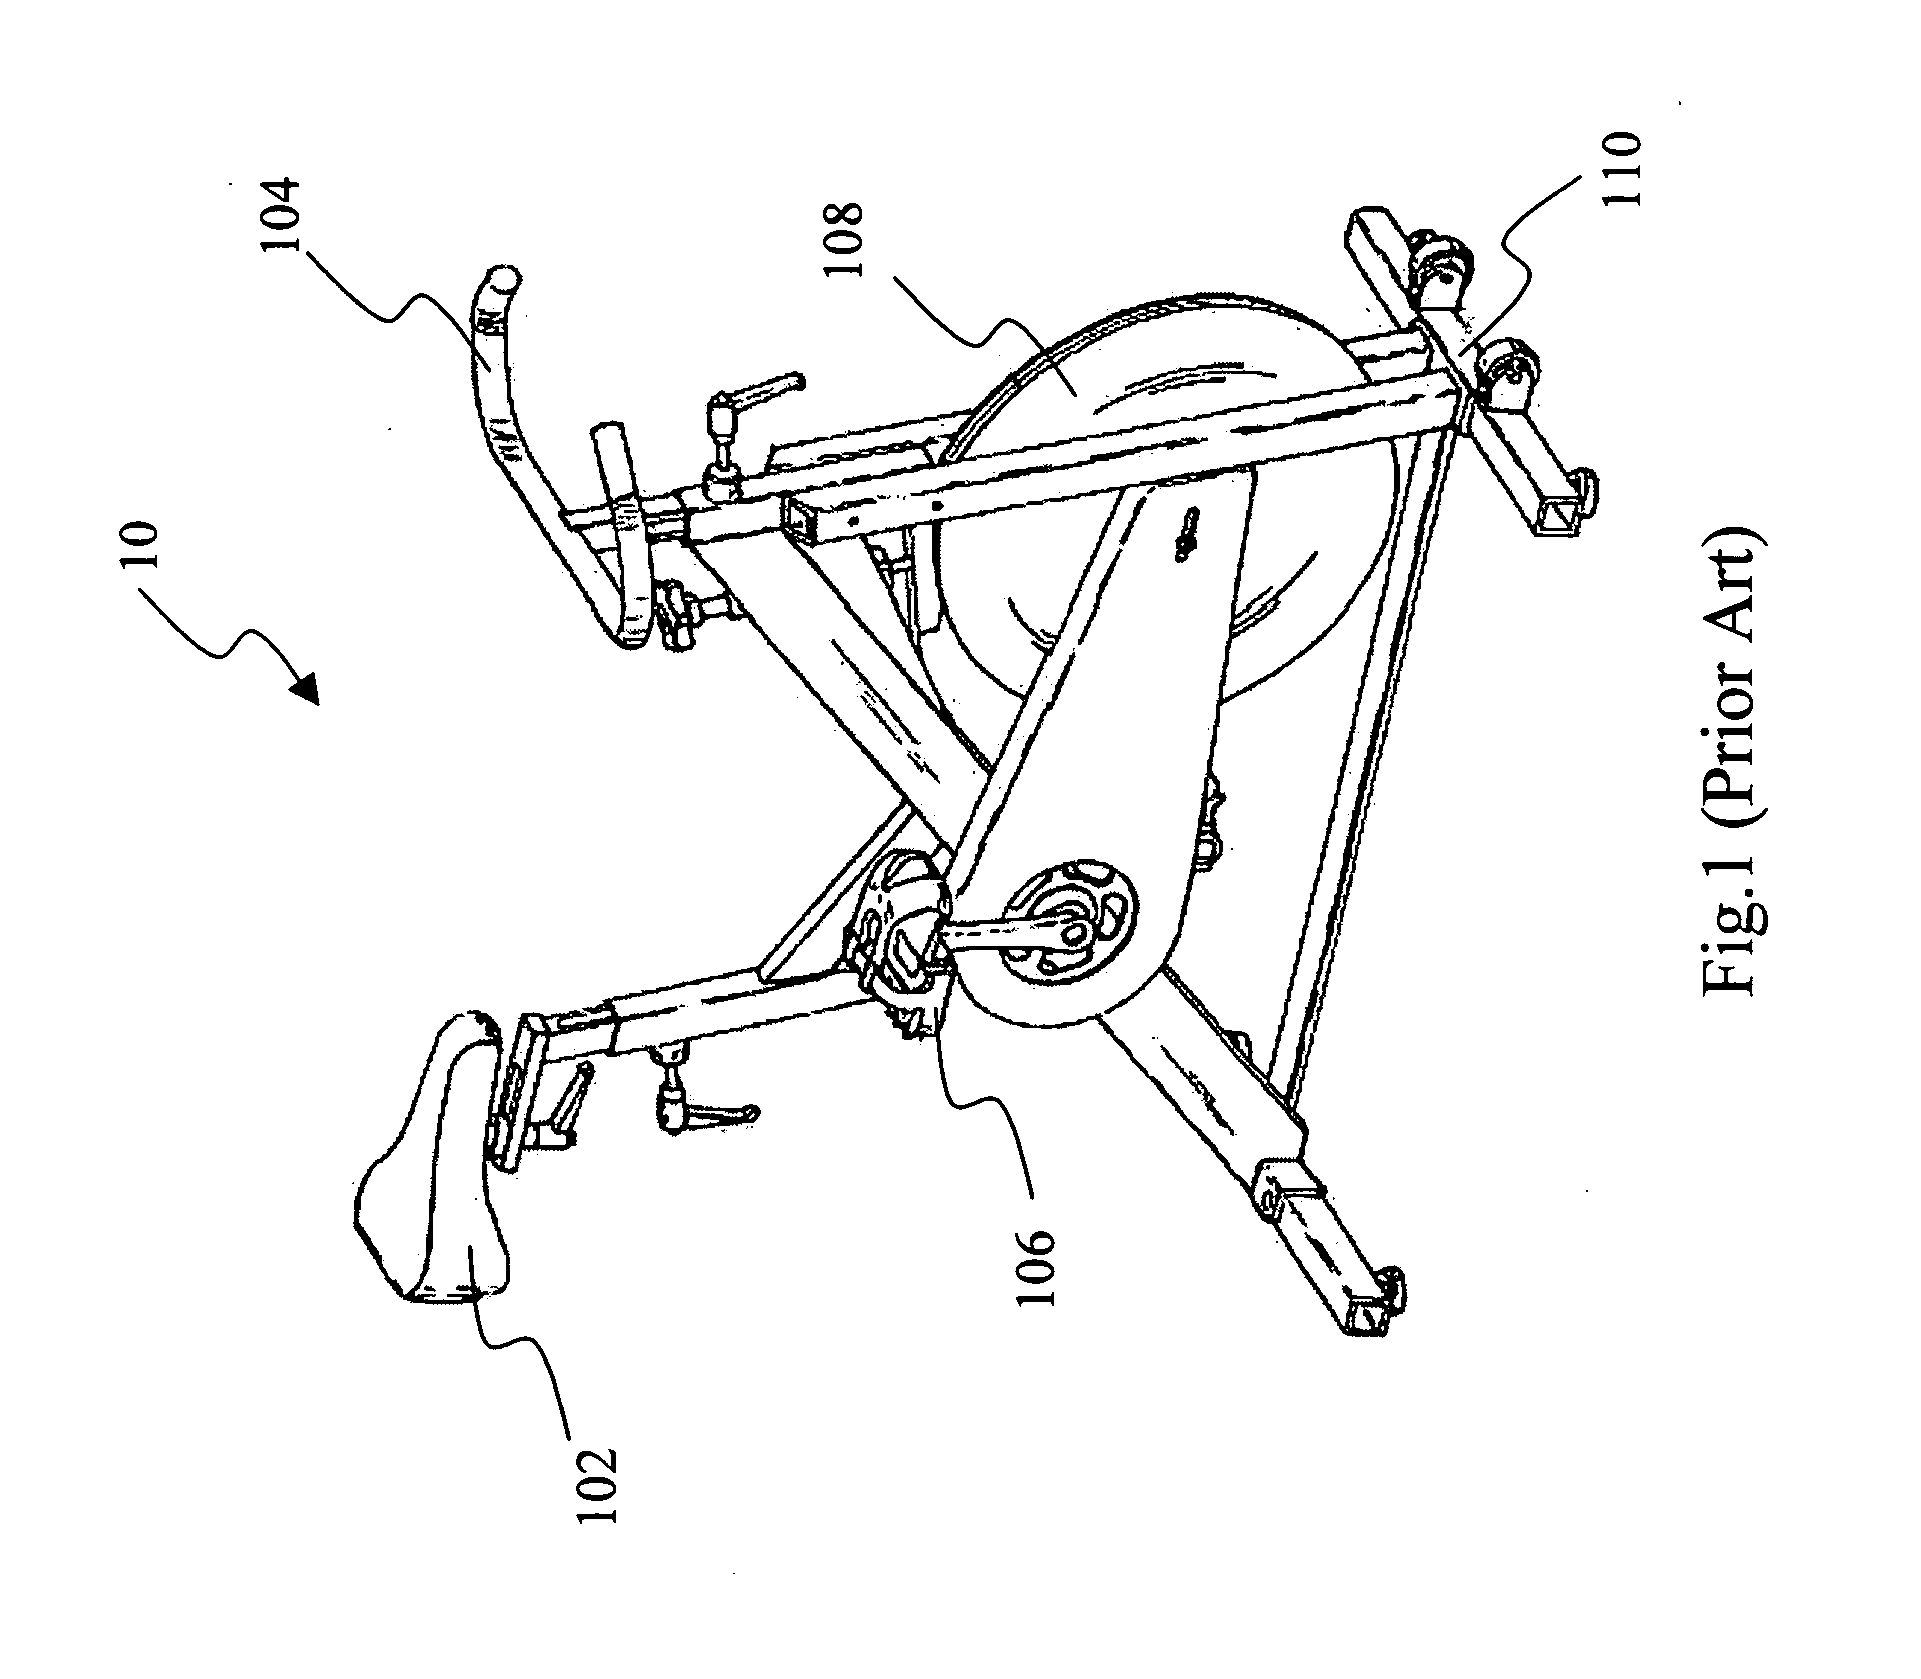 Auxiliary supporting device of a bicycle